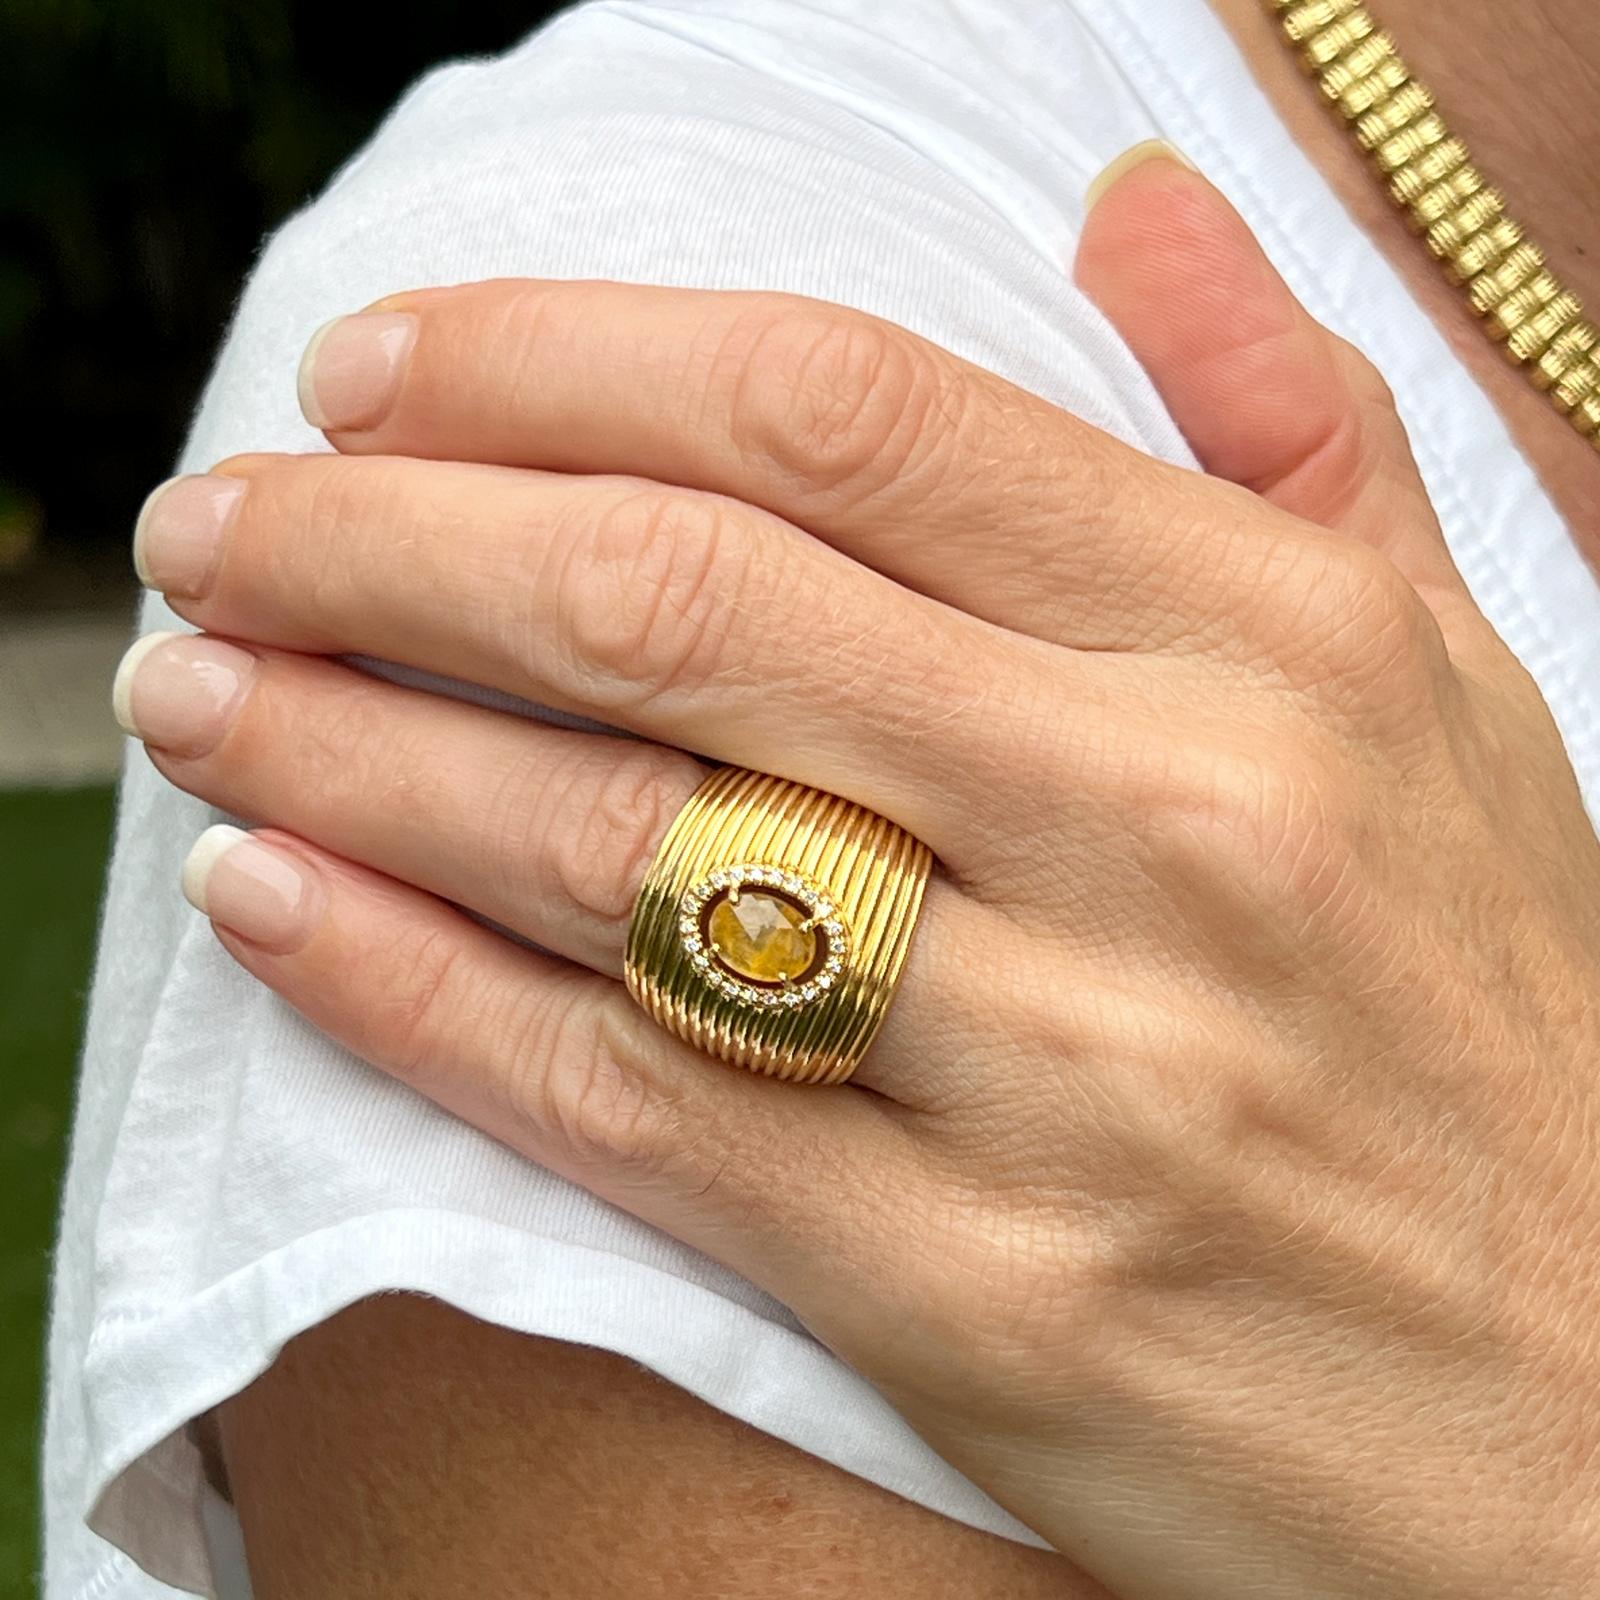 Yellow sapphire and diamond ring by Italian designer Roberto Coin. The ribbed wide band is fashioned in 18 karat yellow gold. The ring features an oval yellow sapphire gemstone weighing approximately 1.00 carat surrounded by 22 round brilliant cut